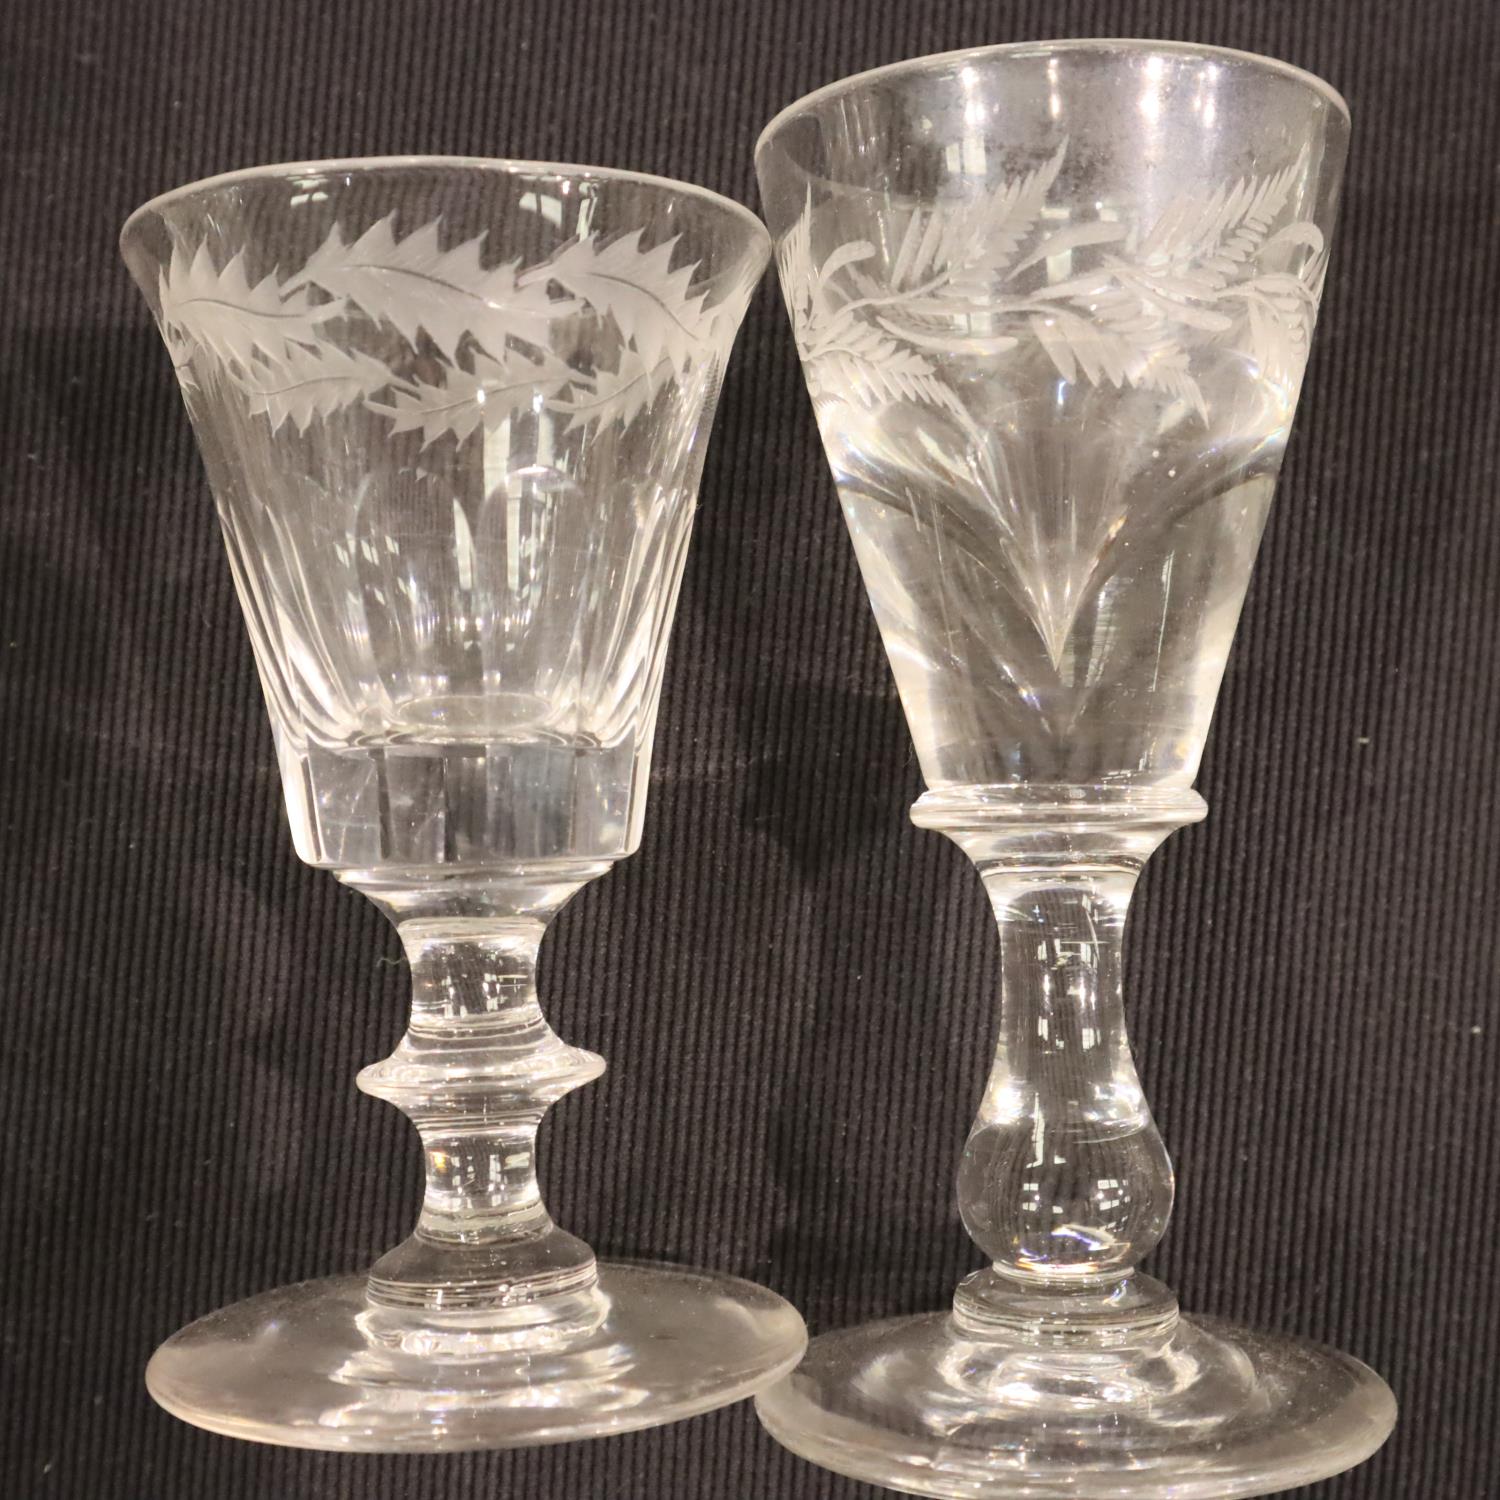 A collection of mixed 19th and 20th Century glassware including etched examples, bowls etc. Not - Image 4 of 5